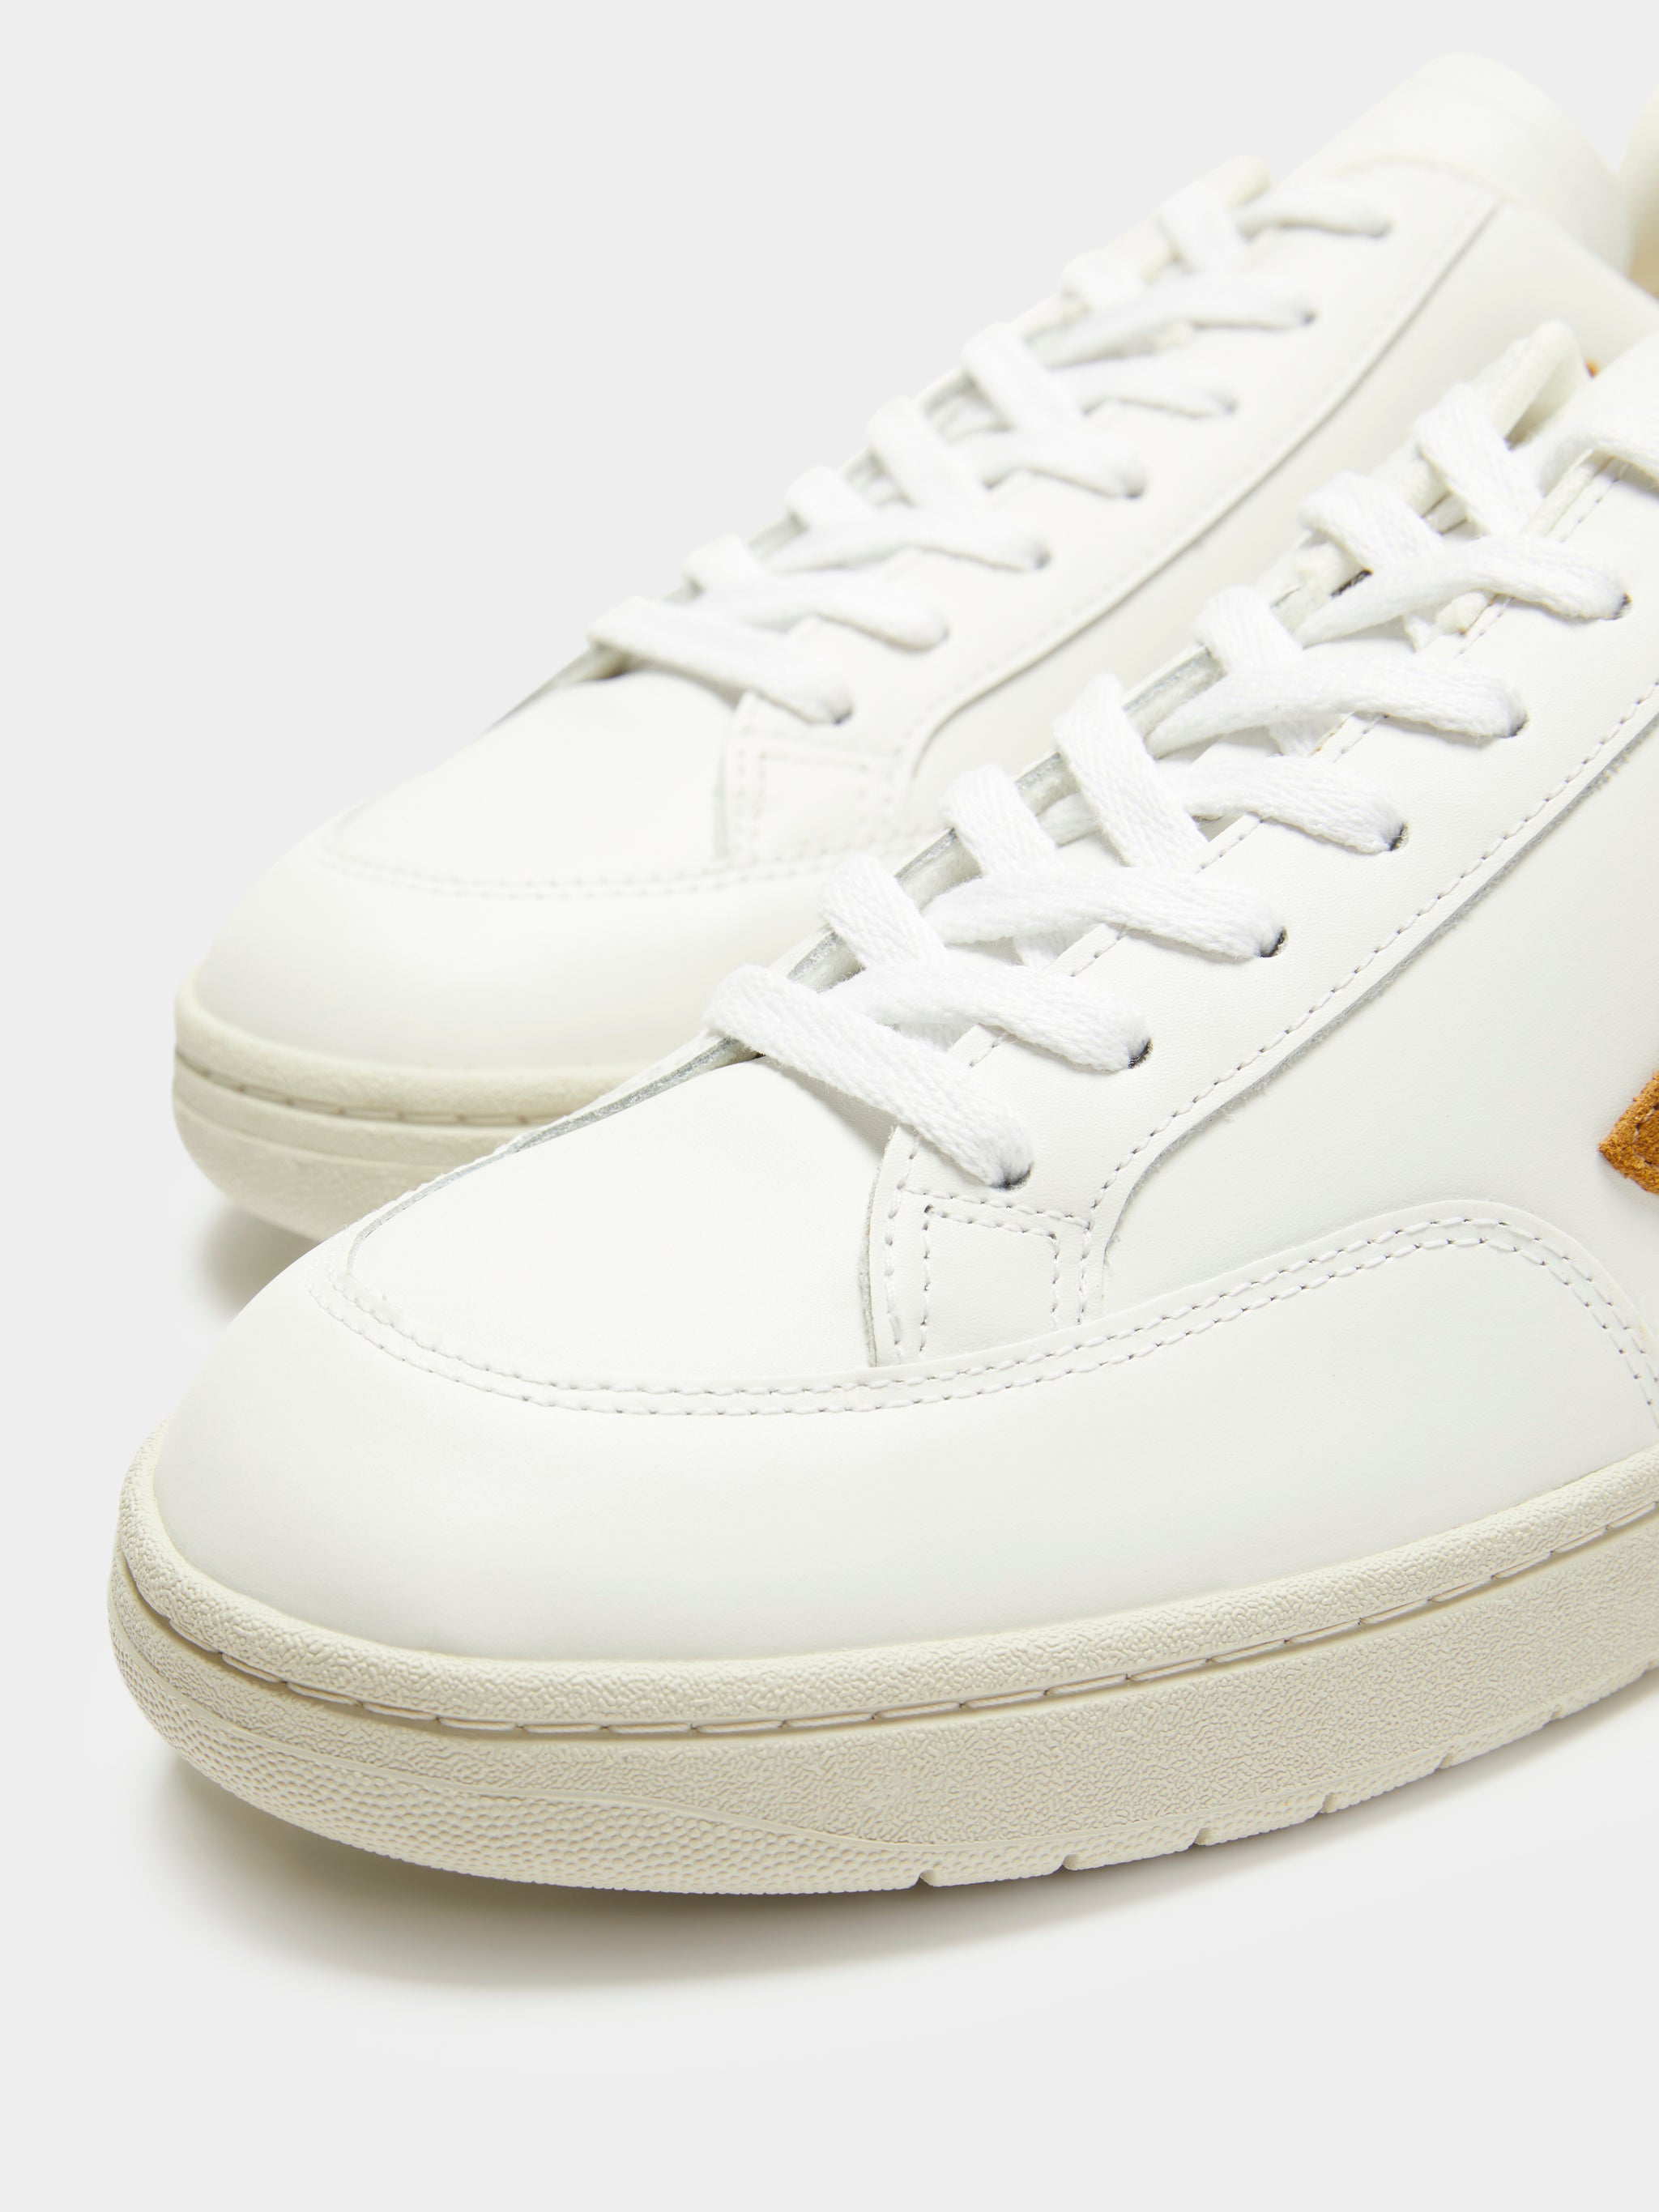 Unisex V10 Leather Sneakers in White & Camel - Glue Store